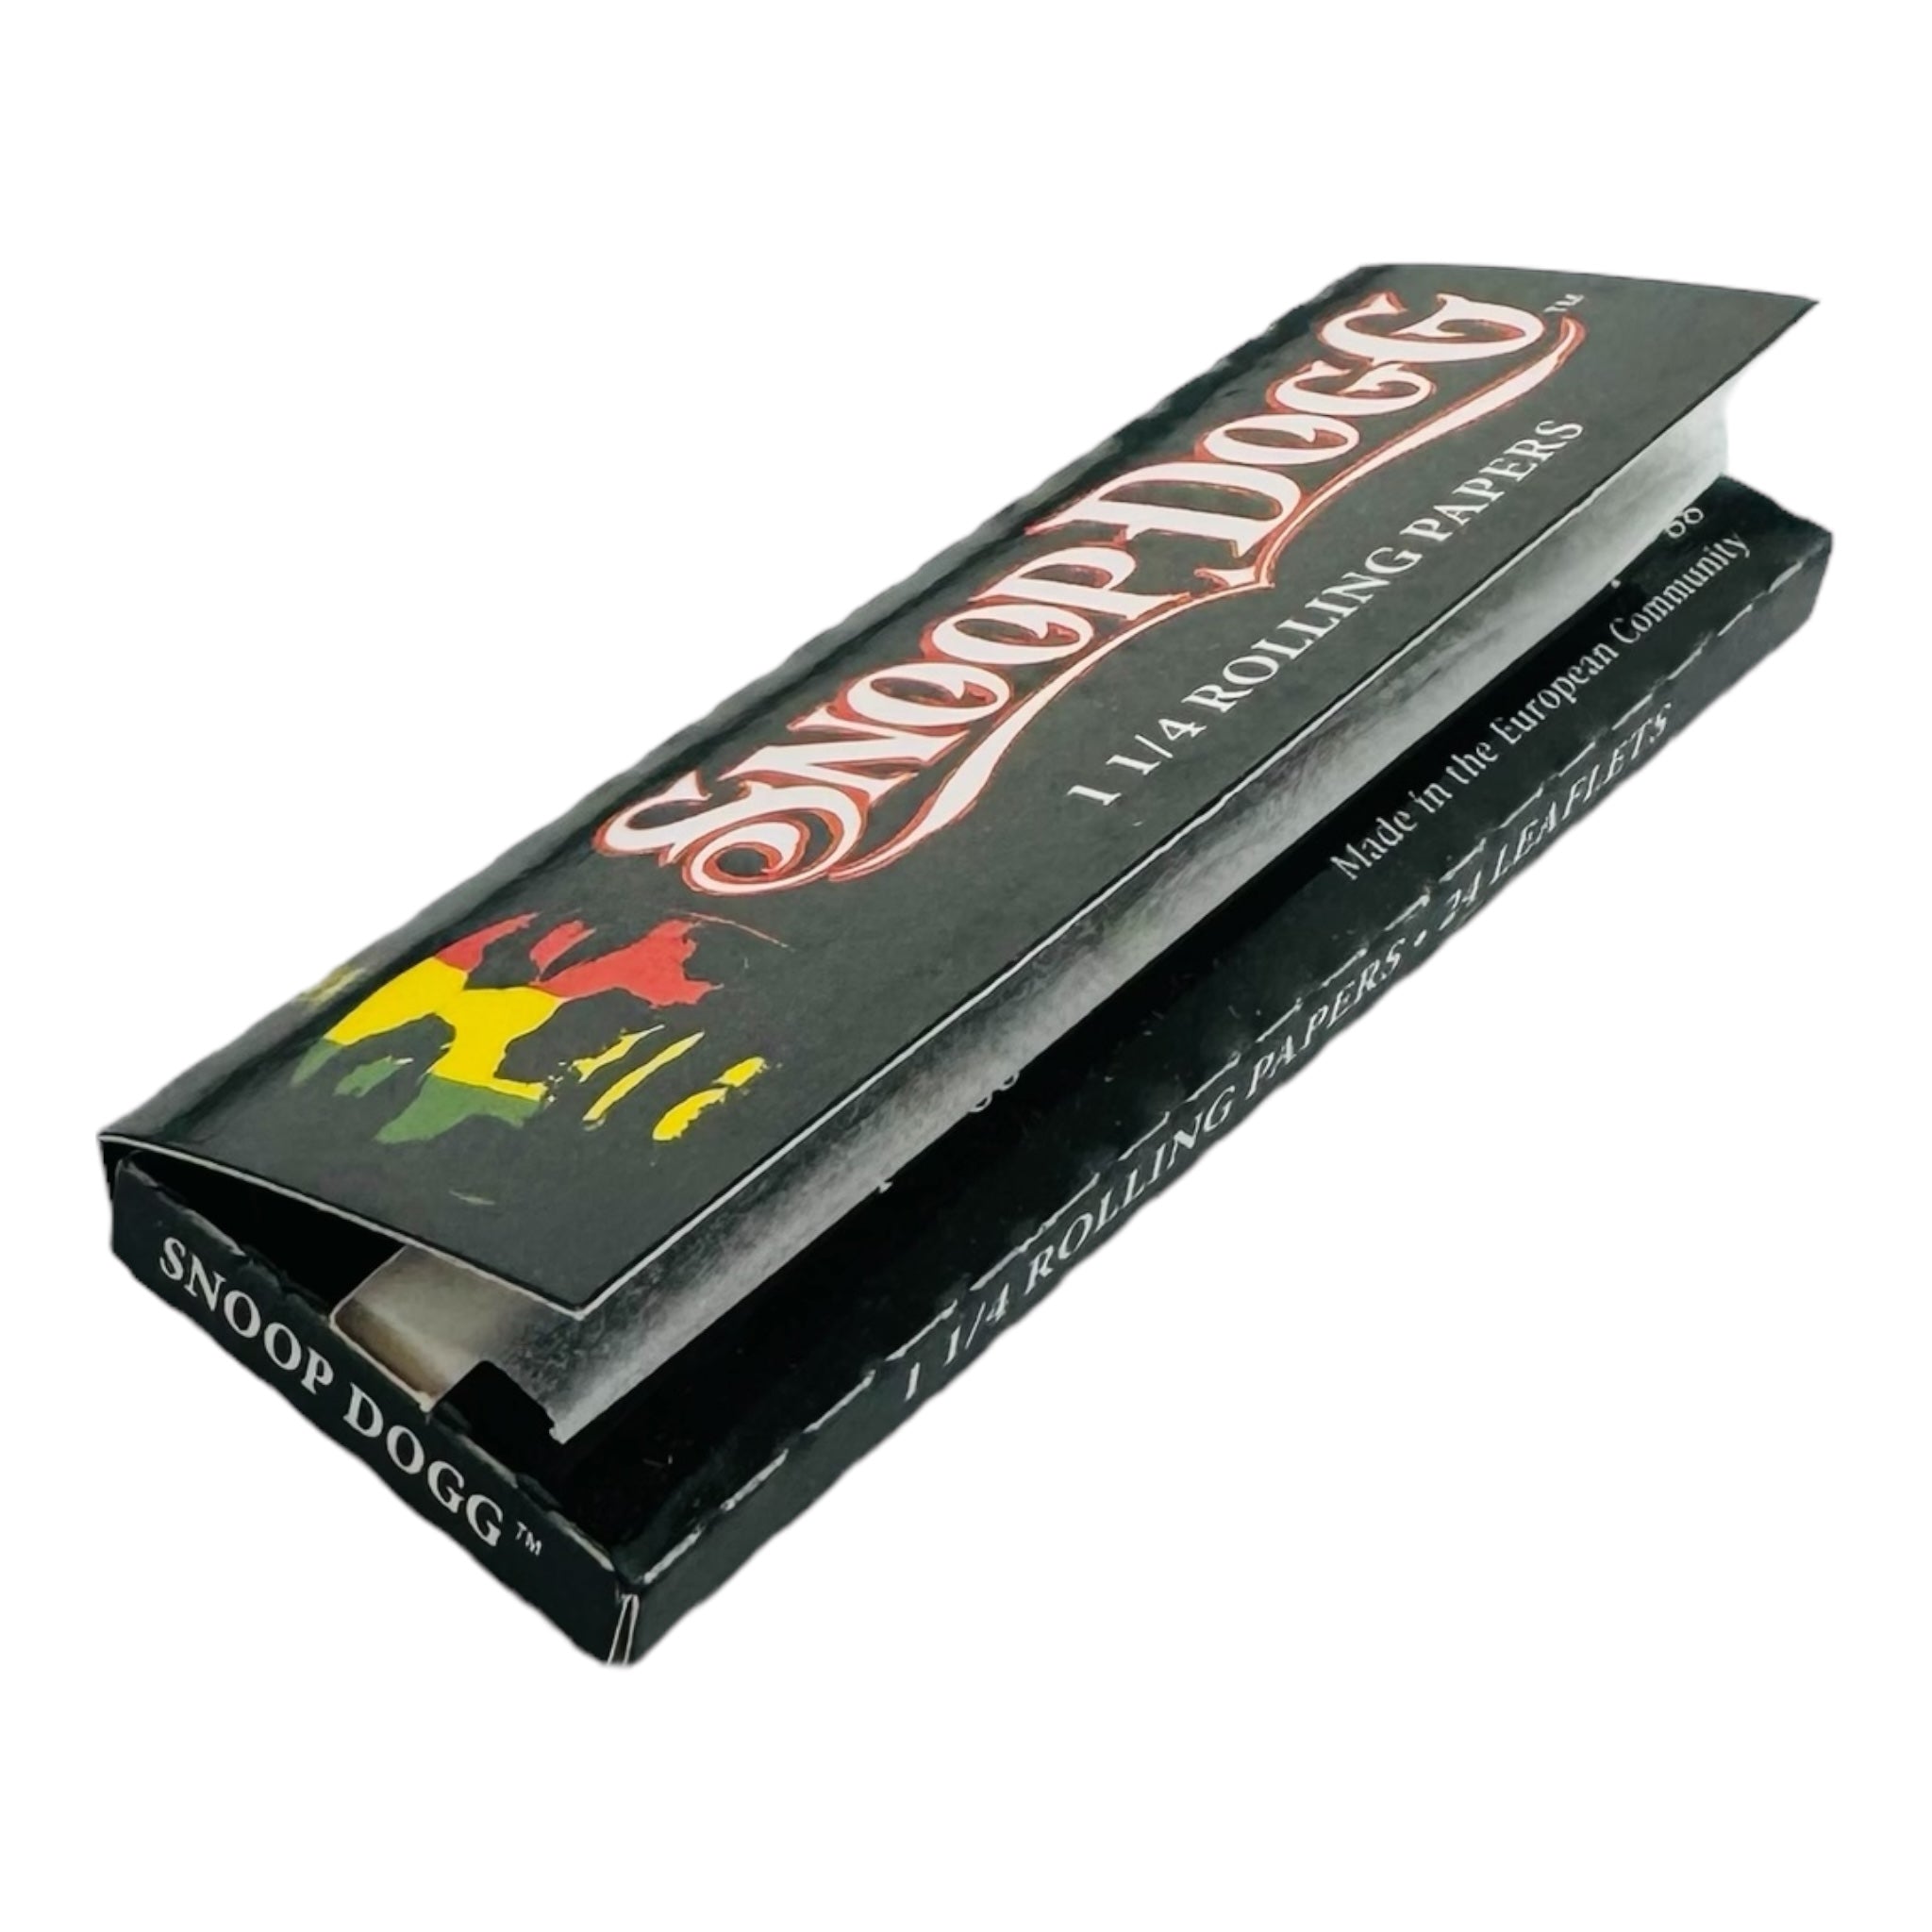 Snoop Dogg joint Rolling Papers 1-1/4